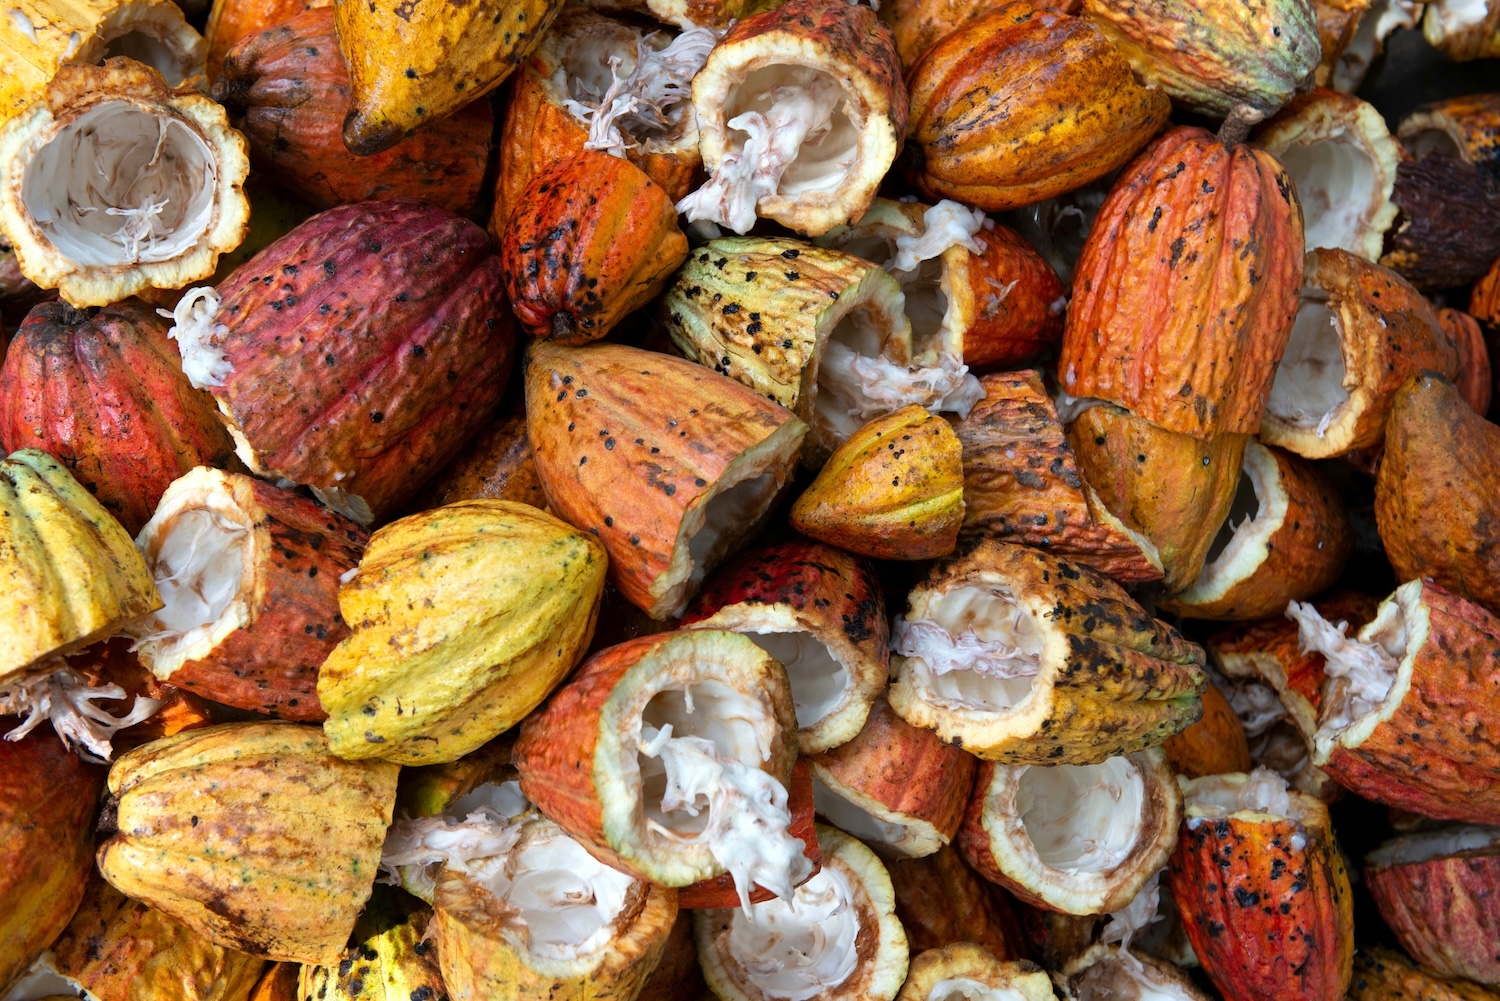 Chocolate lover? New study traces complex origins of cacao